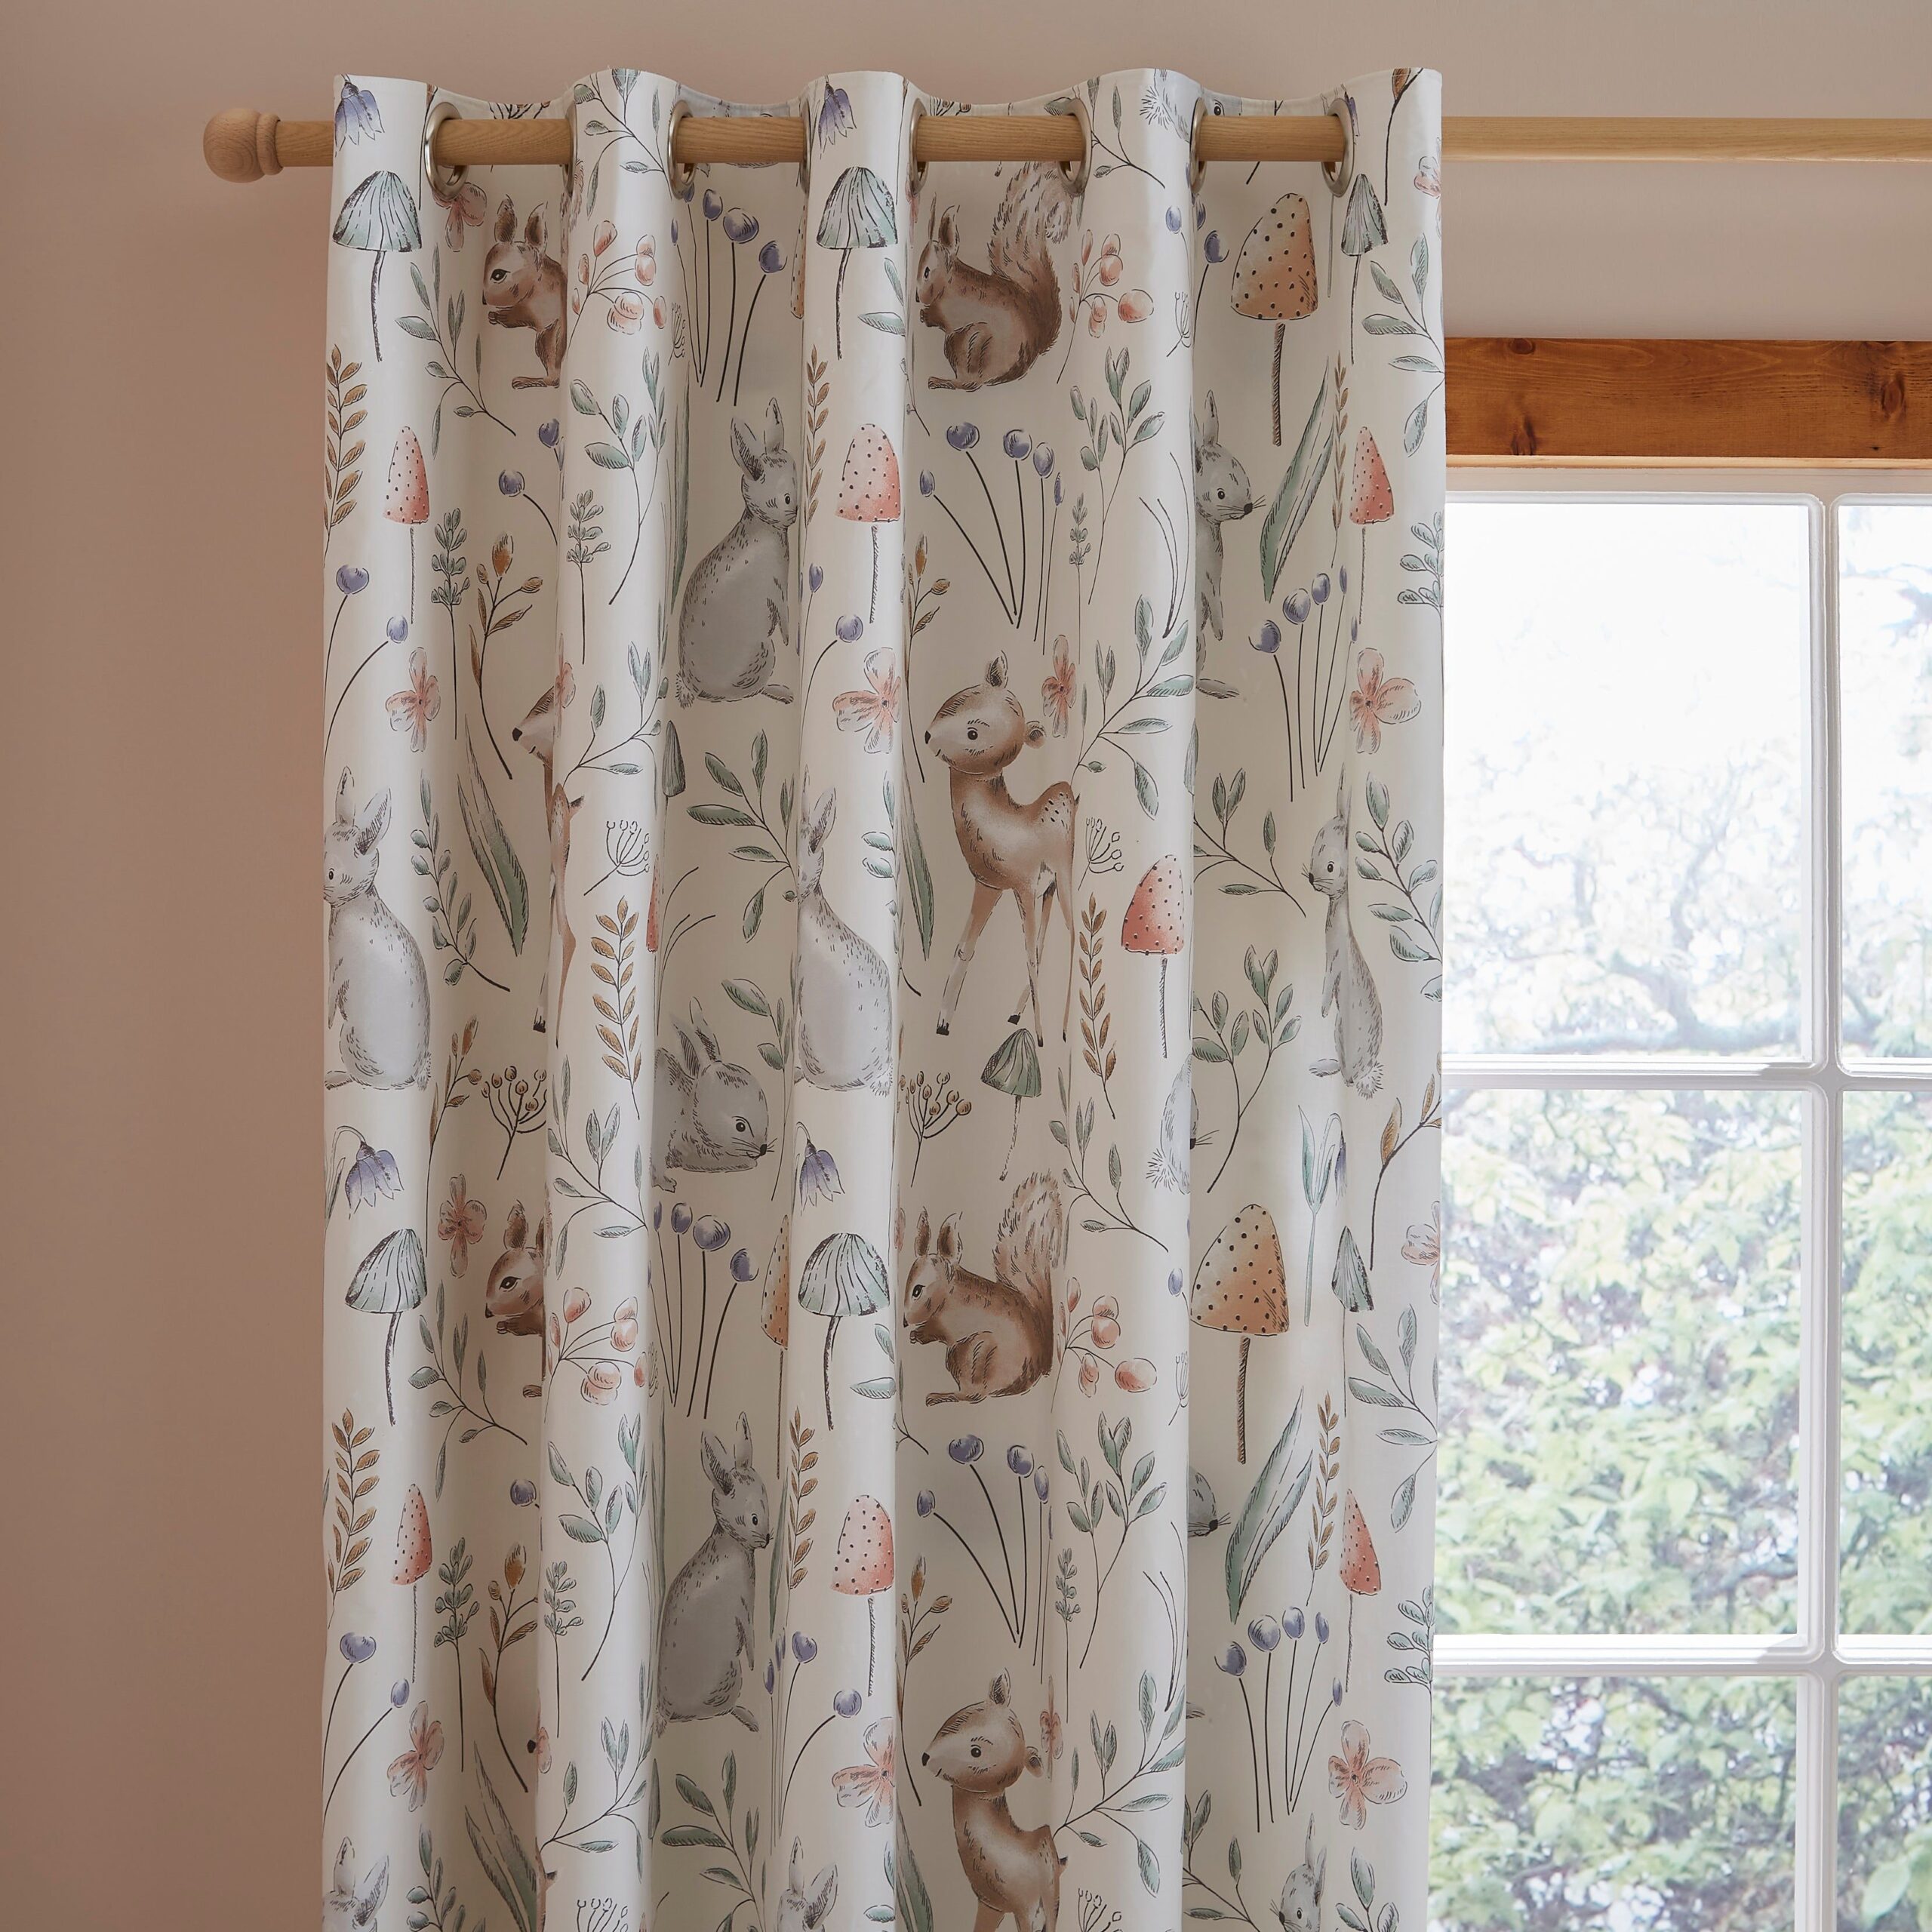 Finding those perfect nursery
curtains  with blackout lining